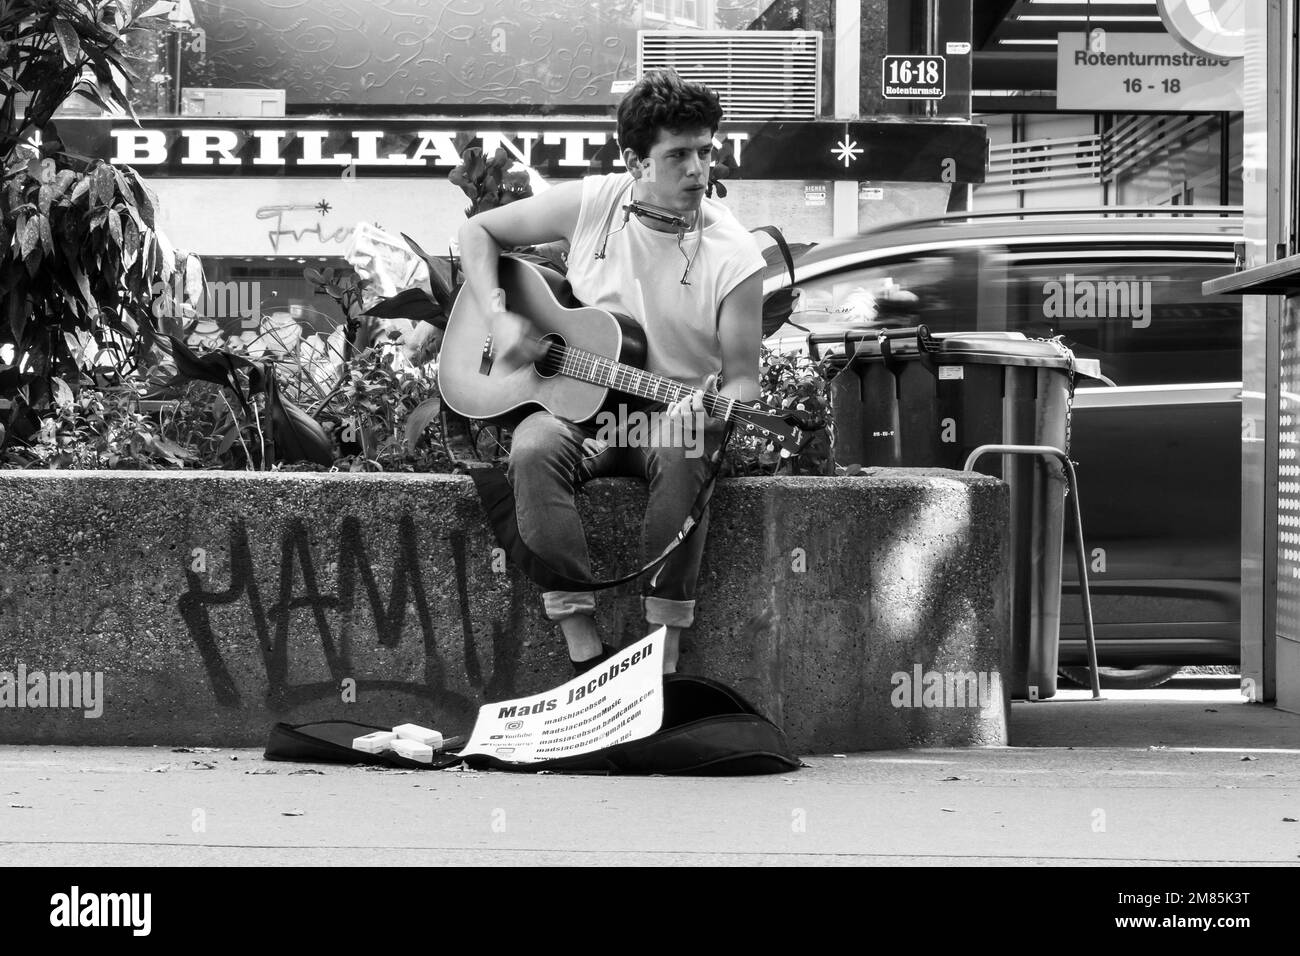 Mads Jacobsen, busker, playing guitar seated on wall near hotdog stand on Rotenturmstrasse in Vienna while couple buy lunch Stock Photo